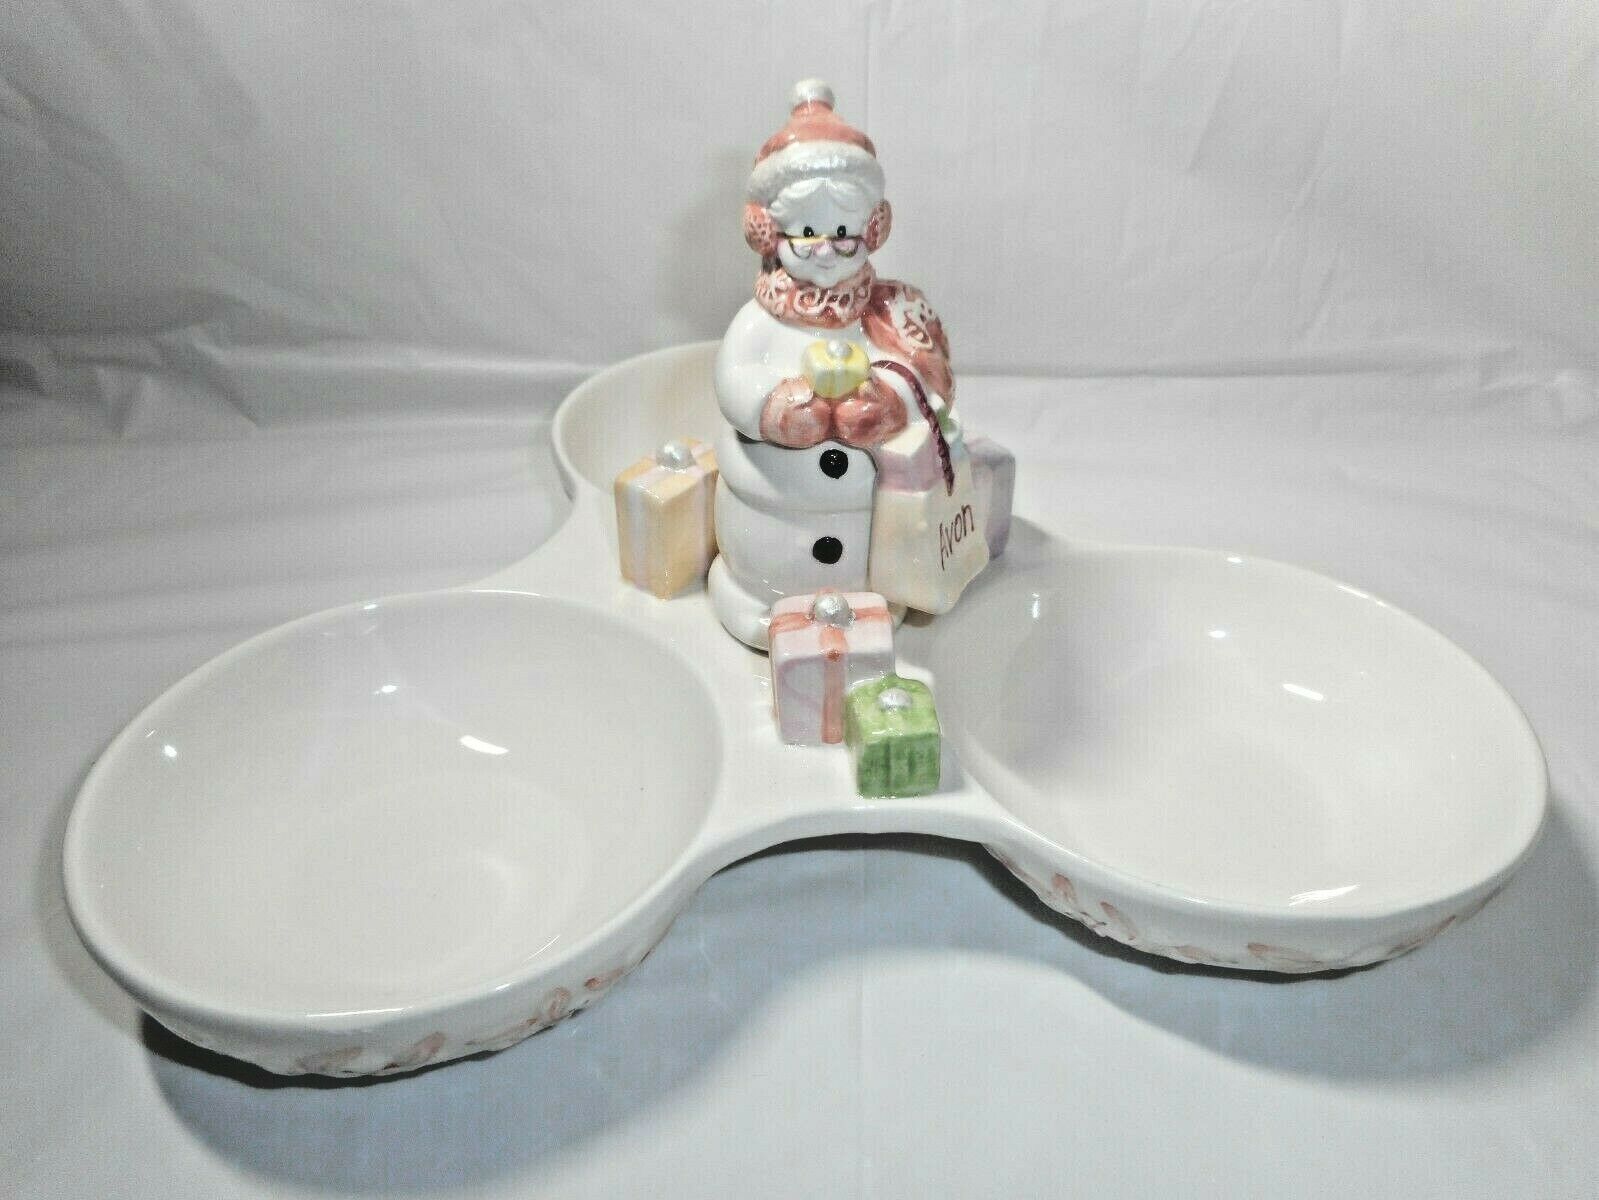 AVON SNOWLADY DISH 2003 PRESIDENTS CLUB HOLIDAY GIFT COLLETION (#2 IN THE SERIES - $12.34